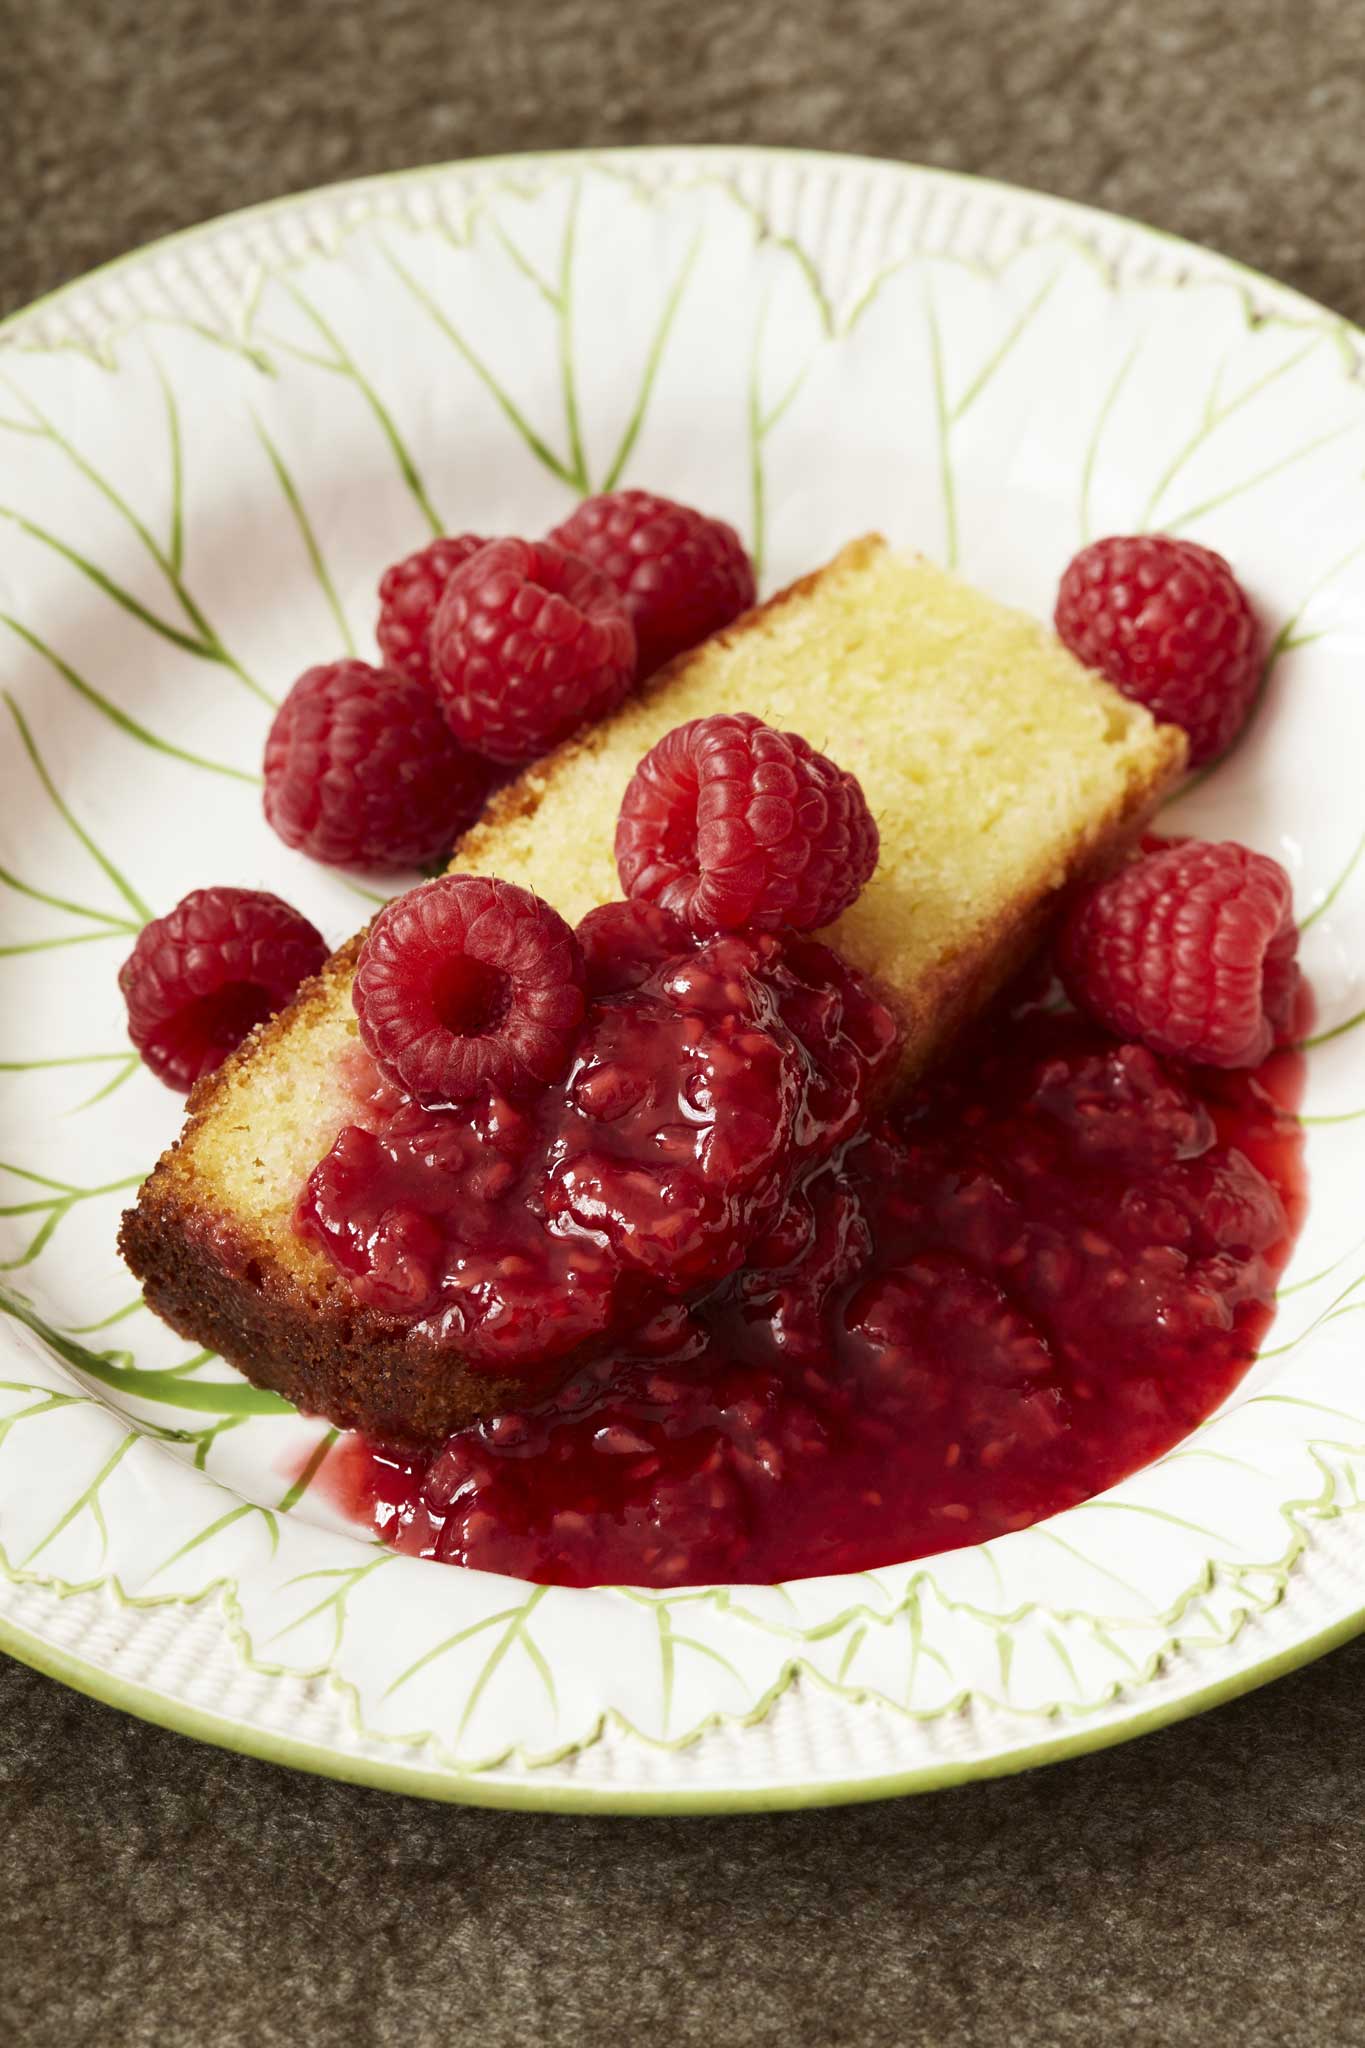 No one needs to feel too guilty about nibbling on Mark's rapeseed oil cake with raspberries